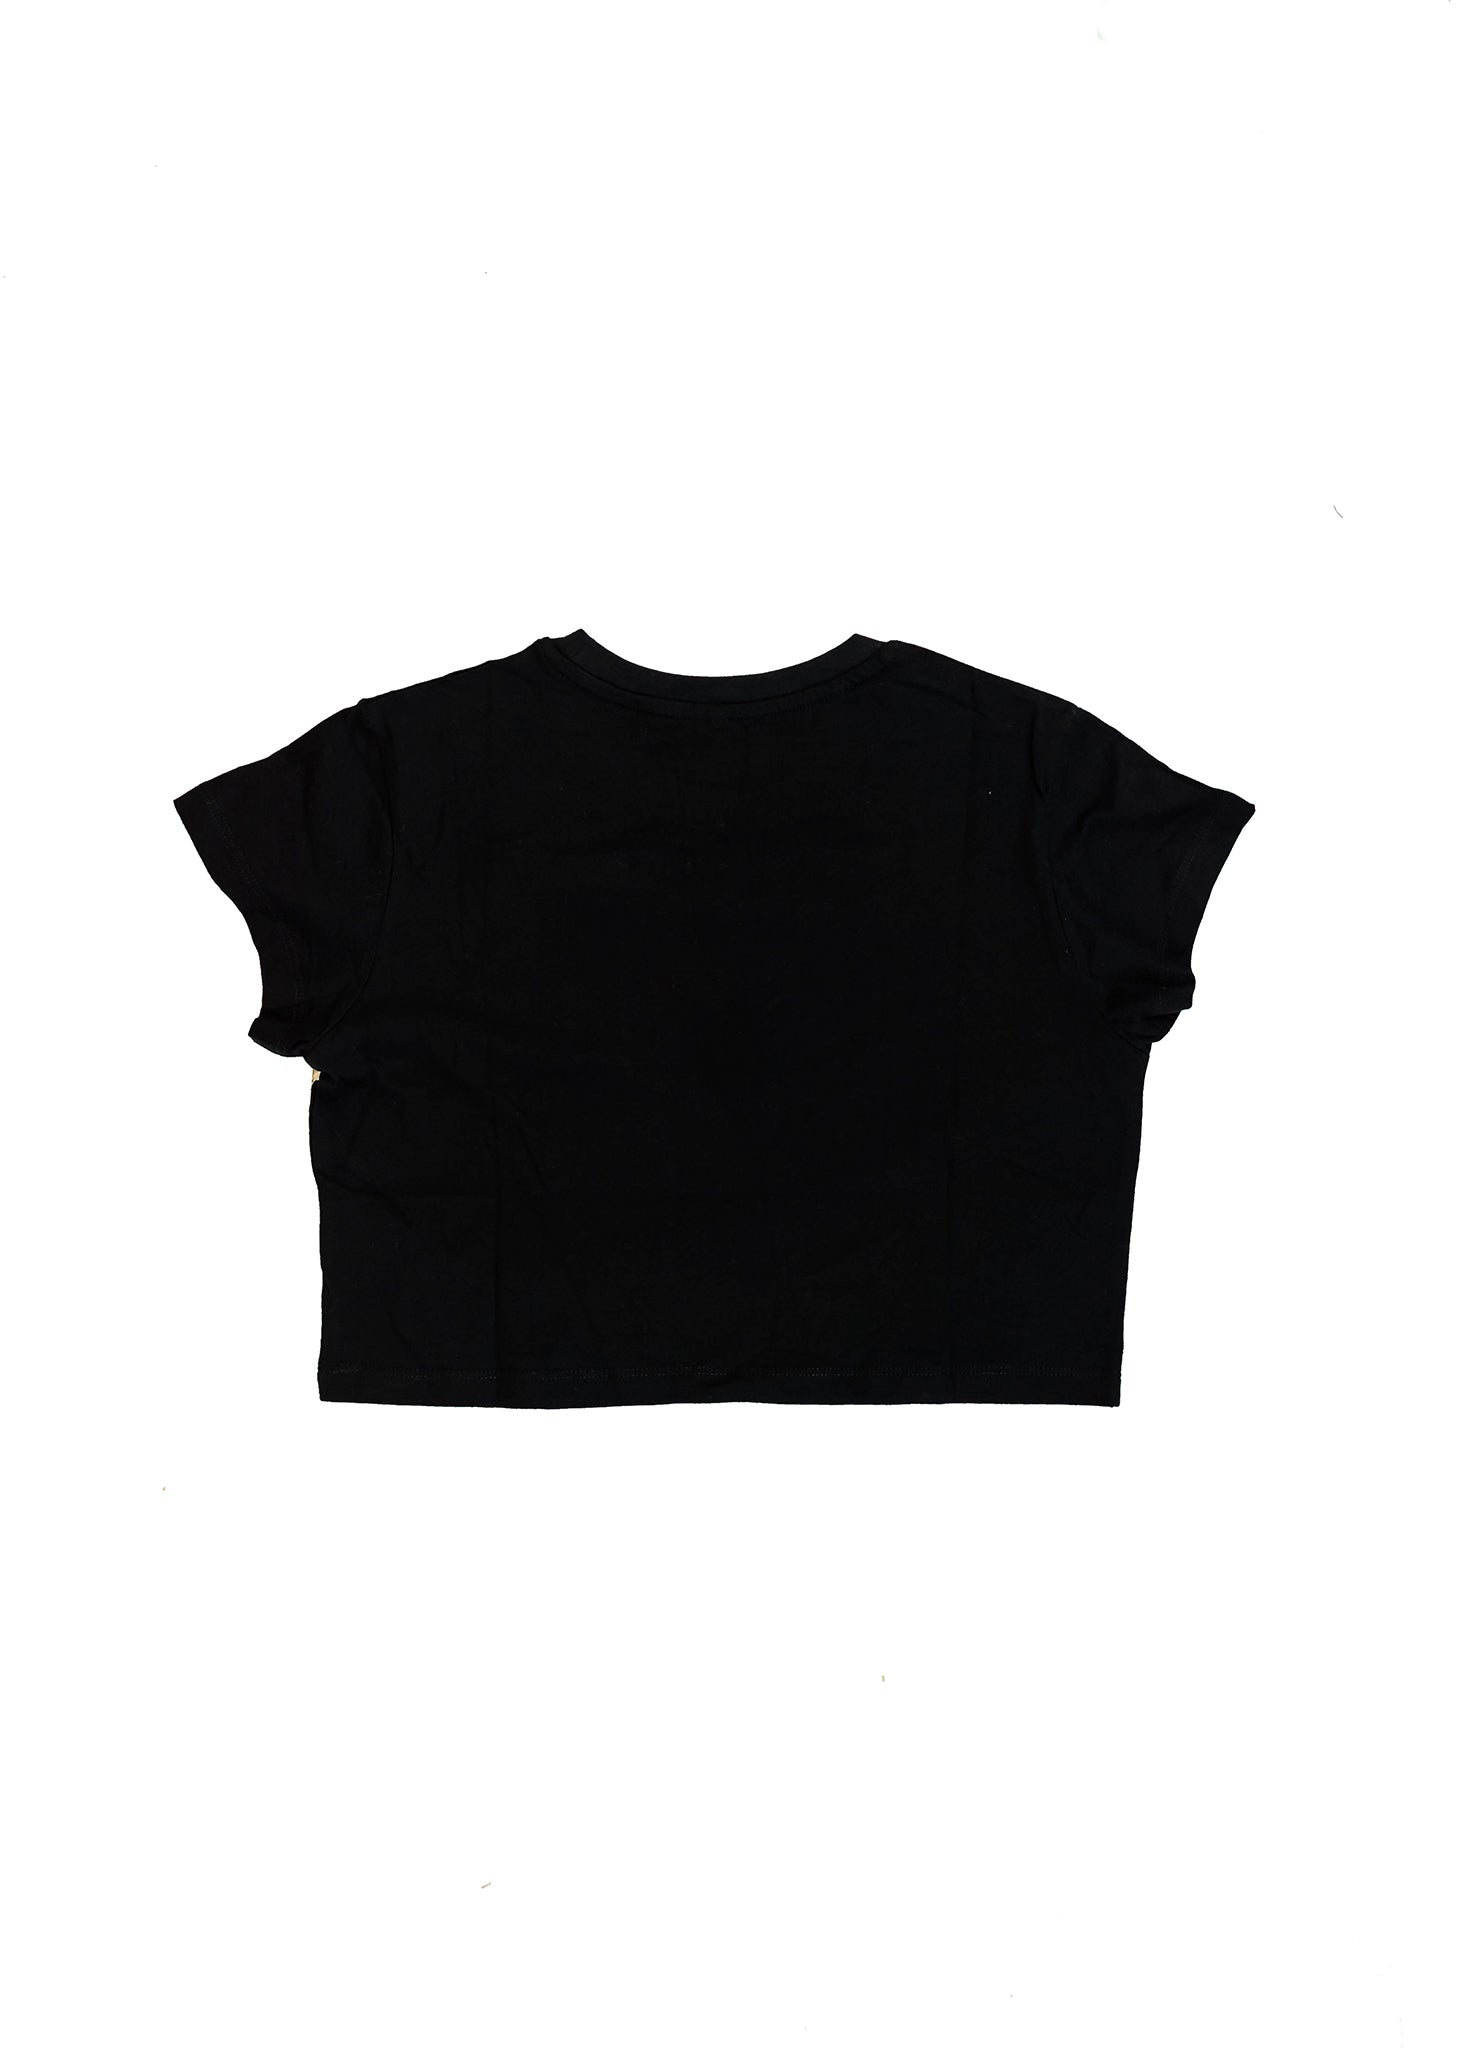 A black women's high quality cropped t-shirt. Full size view of the back side of a black cropped shirt with a nardo grey embroidered 8V RS3. Fabric composition of this tee is 100% cotton. The material is very soft, stretchy, and non-transparent. The style of this tshirt is a crewneck, short sleeve, cropped at the waist, with embroidery on the left chest.